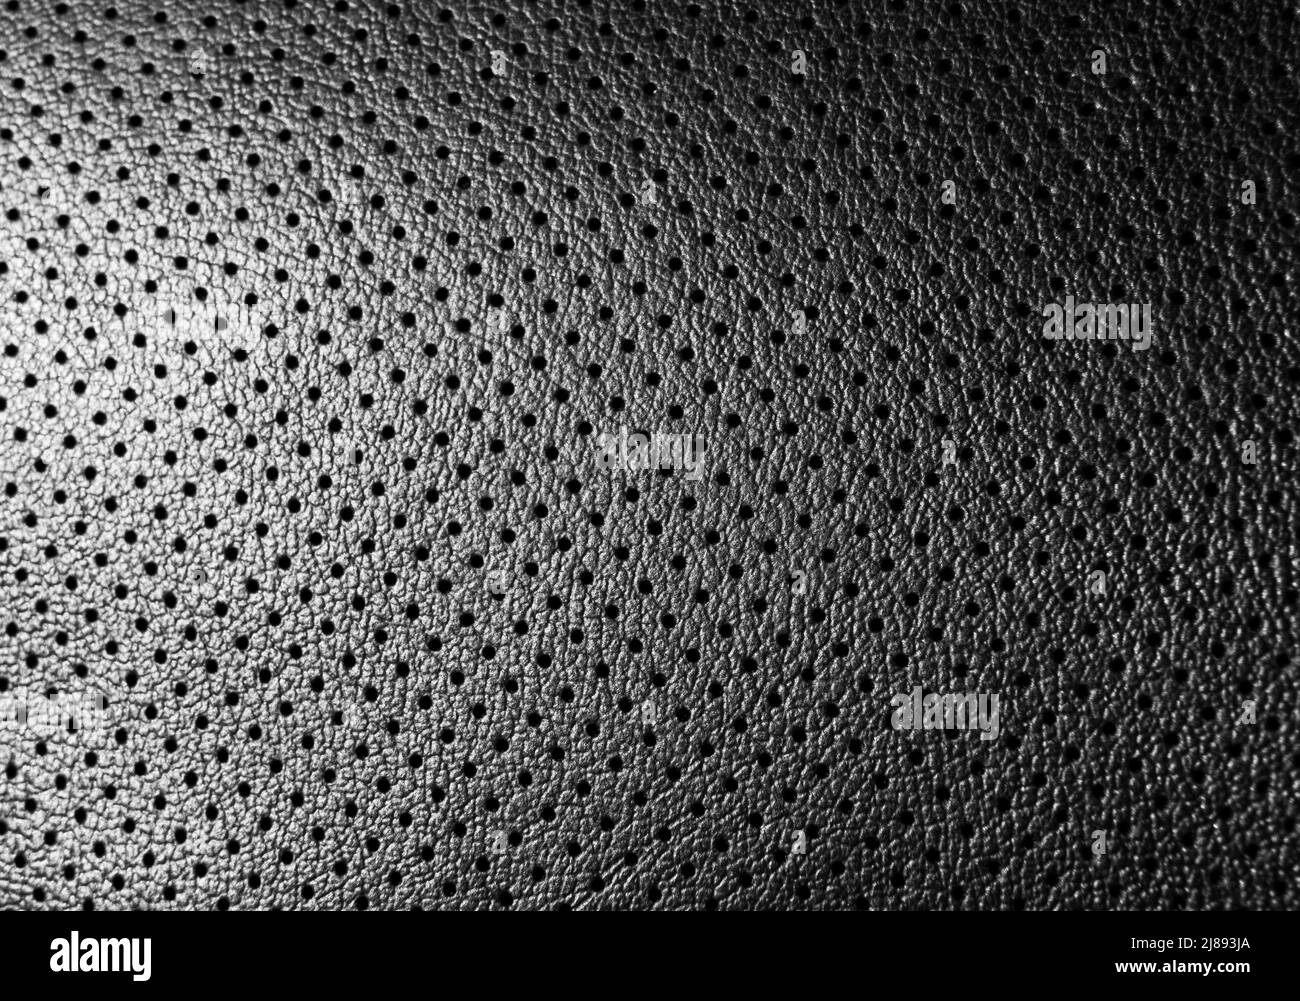 Closeup perforated black leather texture background Stock Photo